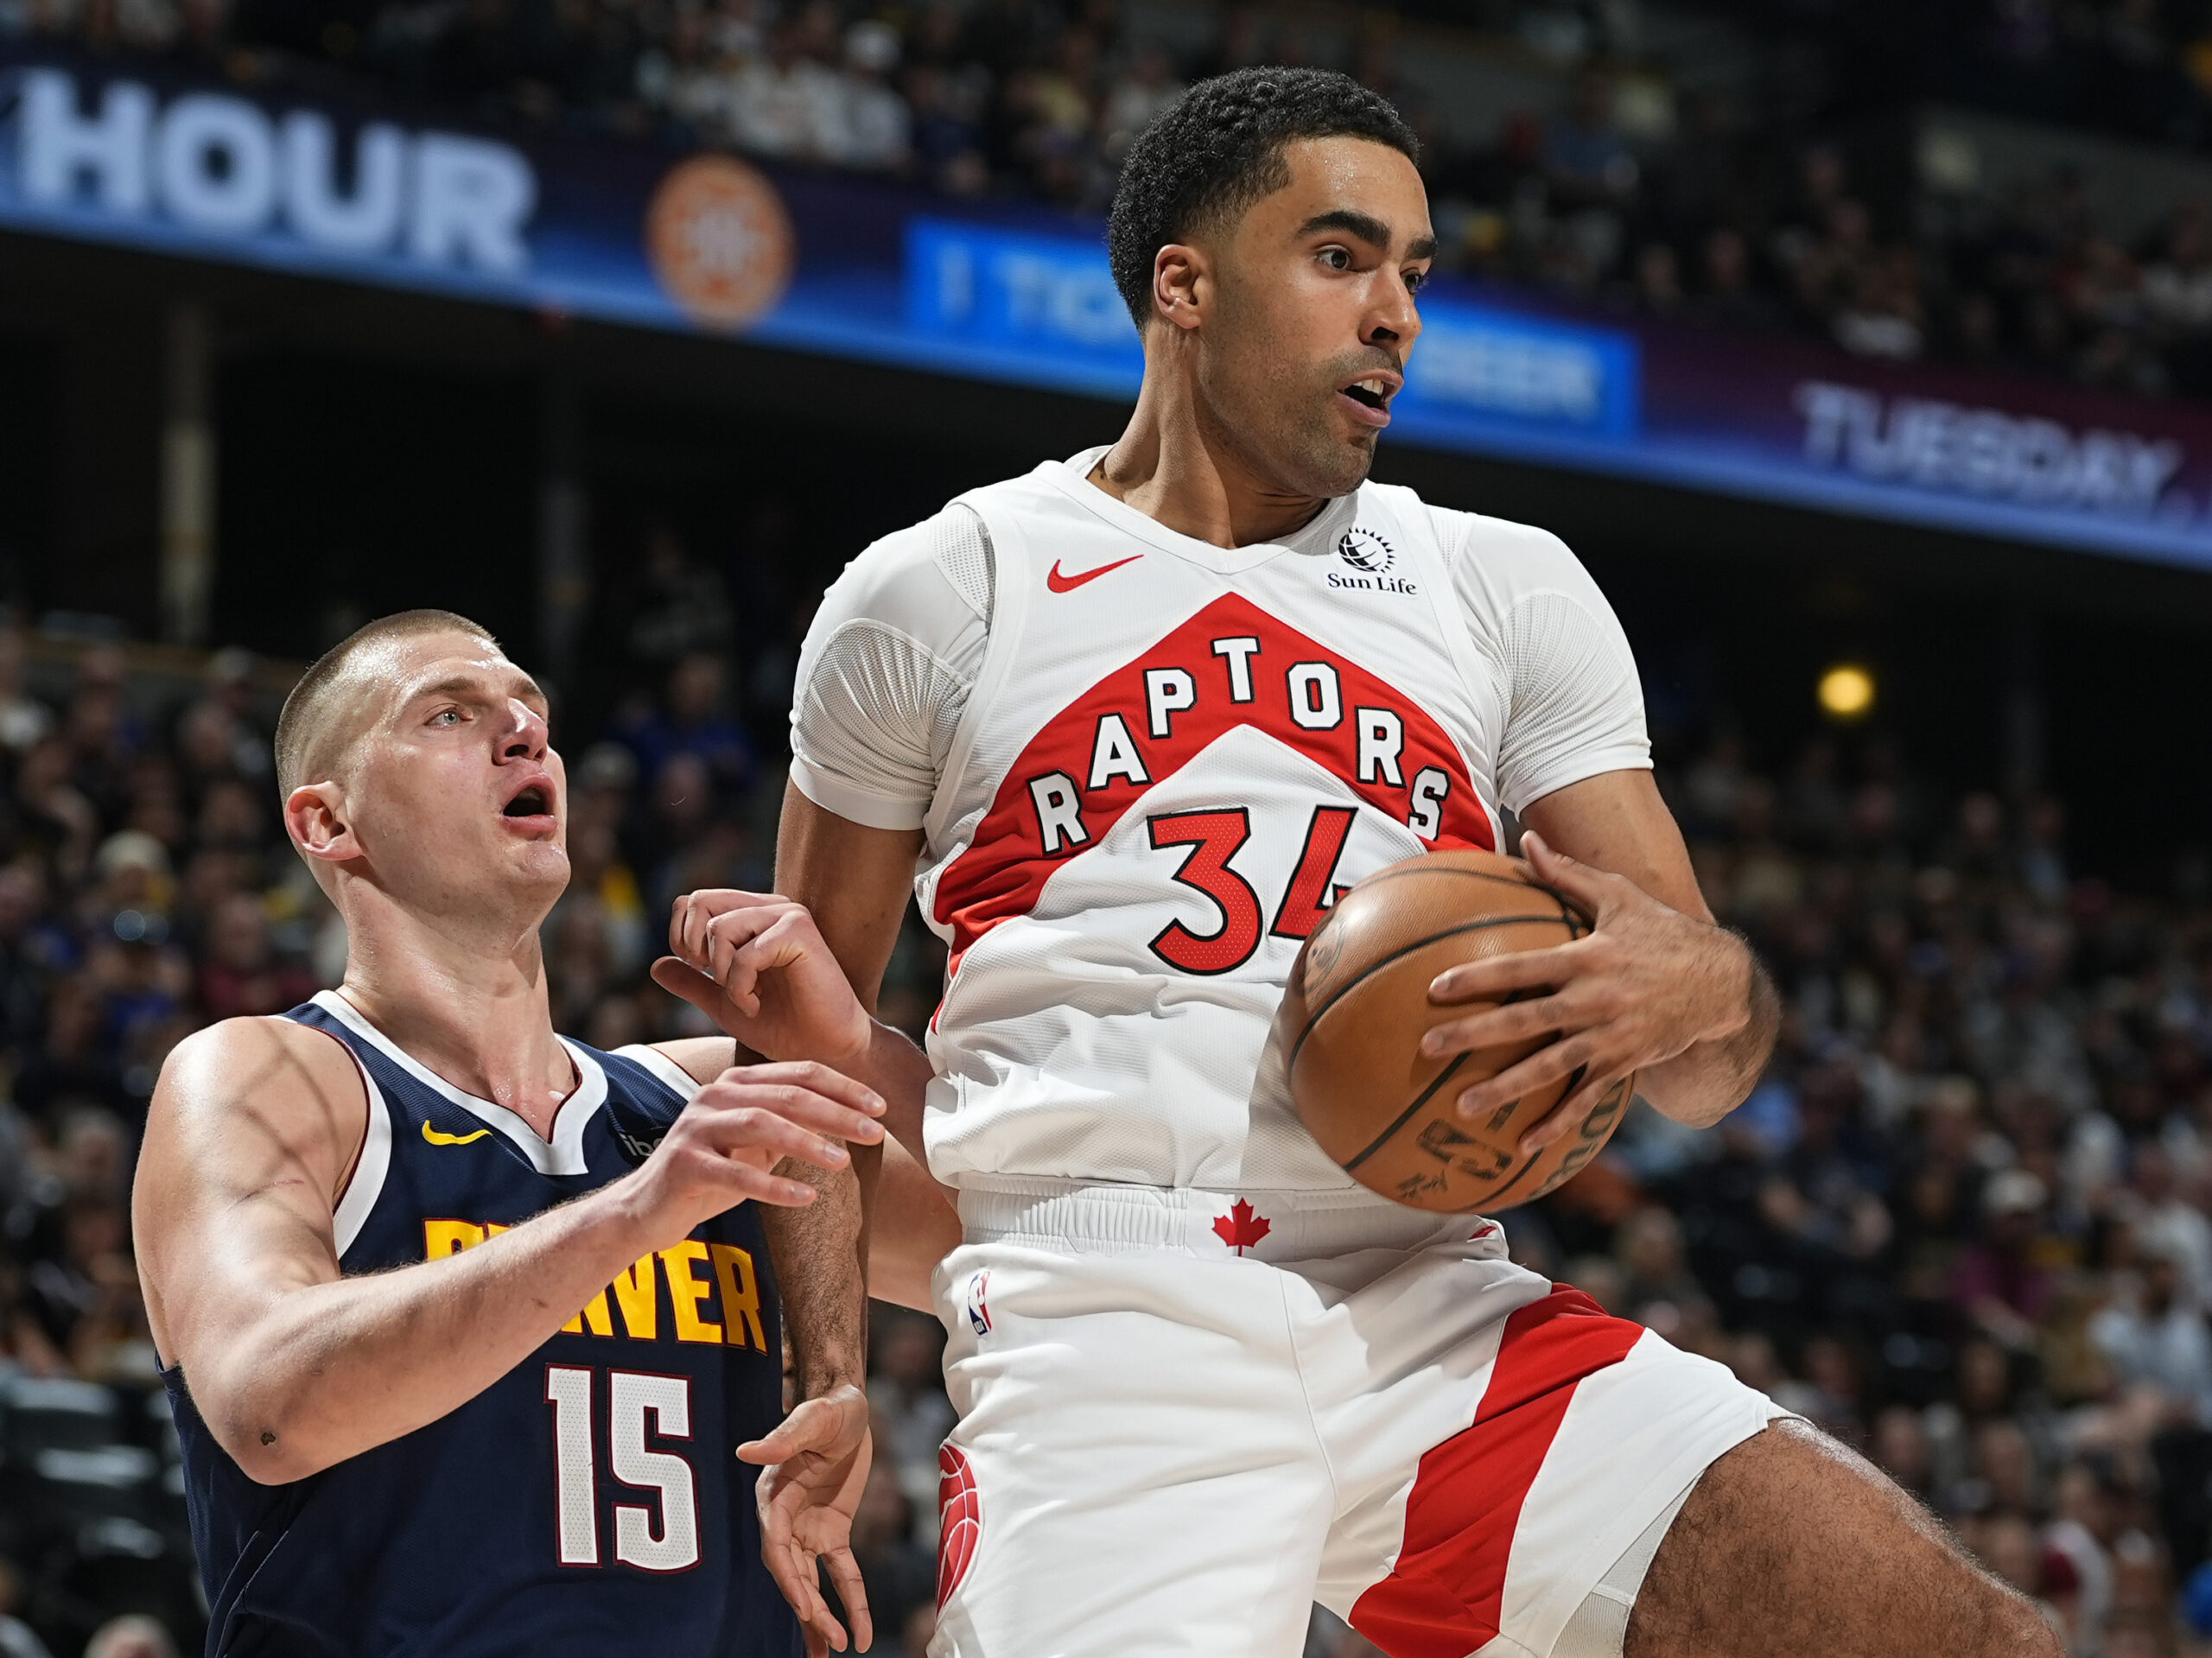 Toronto Raptors center Jontay Porter (right) pulls in a rebound as Denver Nuggets center Nikola Jokic defends in an NBA game on March 11 in Denver. On Wednesday, the NBA banned Porter after a league probe found he disclosed confidential information to sports bettors and bet on games.